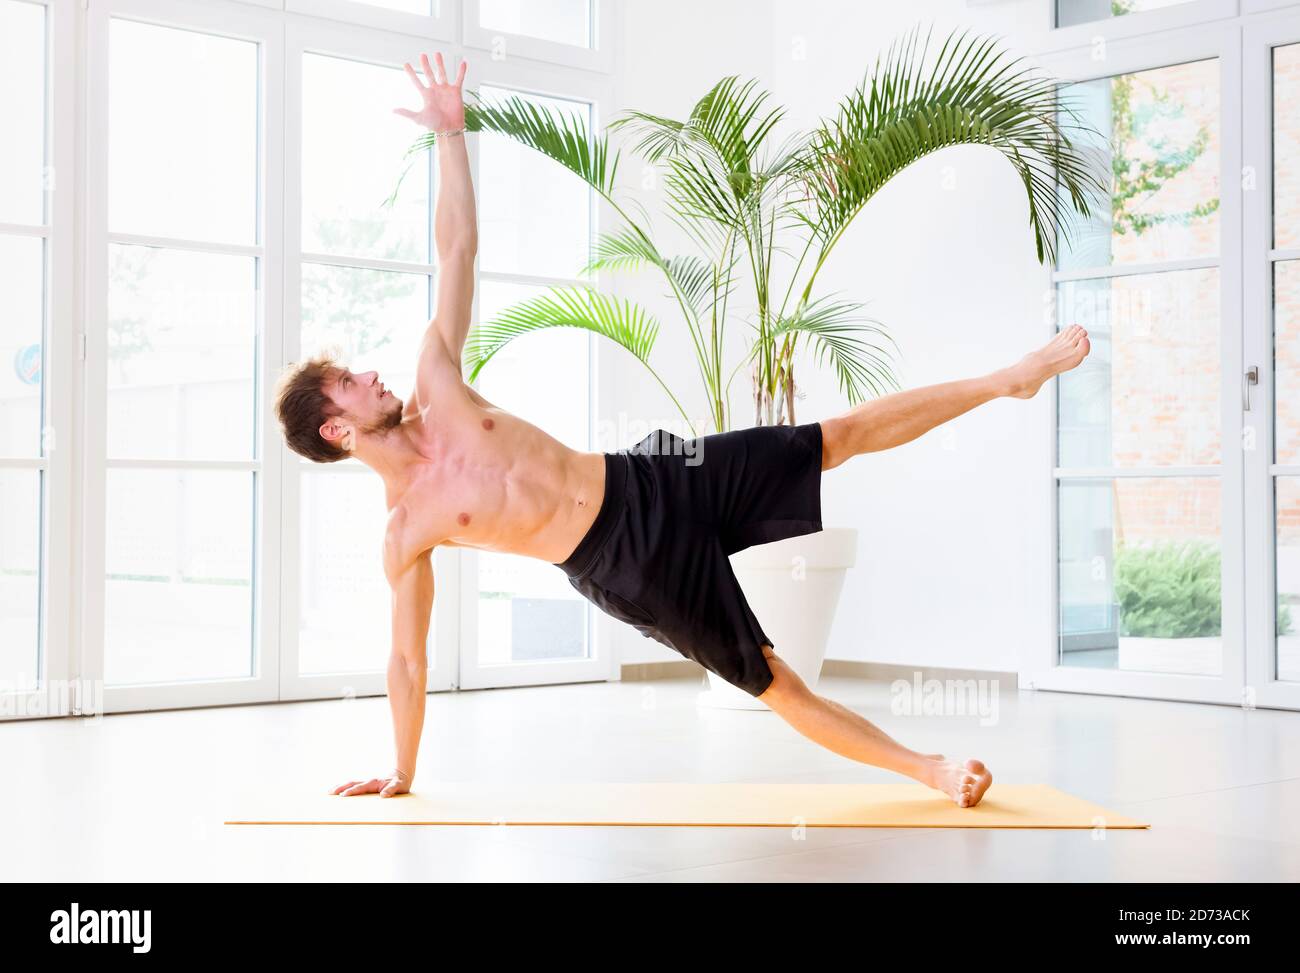 Man doing a side plank yoga exercise to strengthen his core muscles, arm and wrist in side view in a high key gym in a health and fitness concept Stock Photo